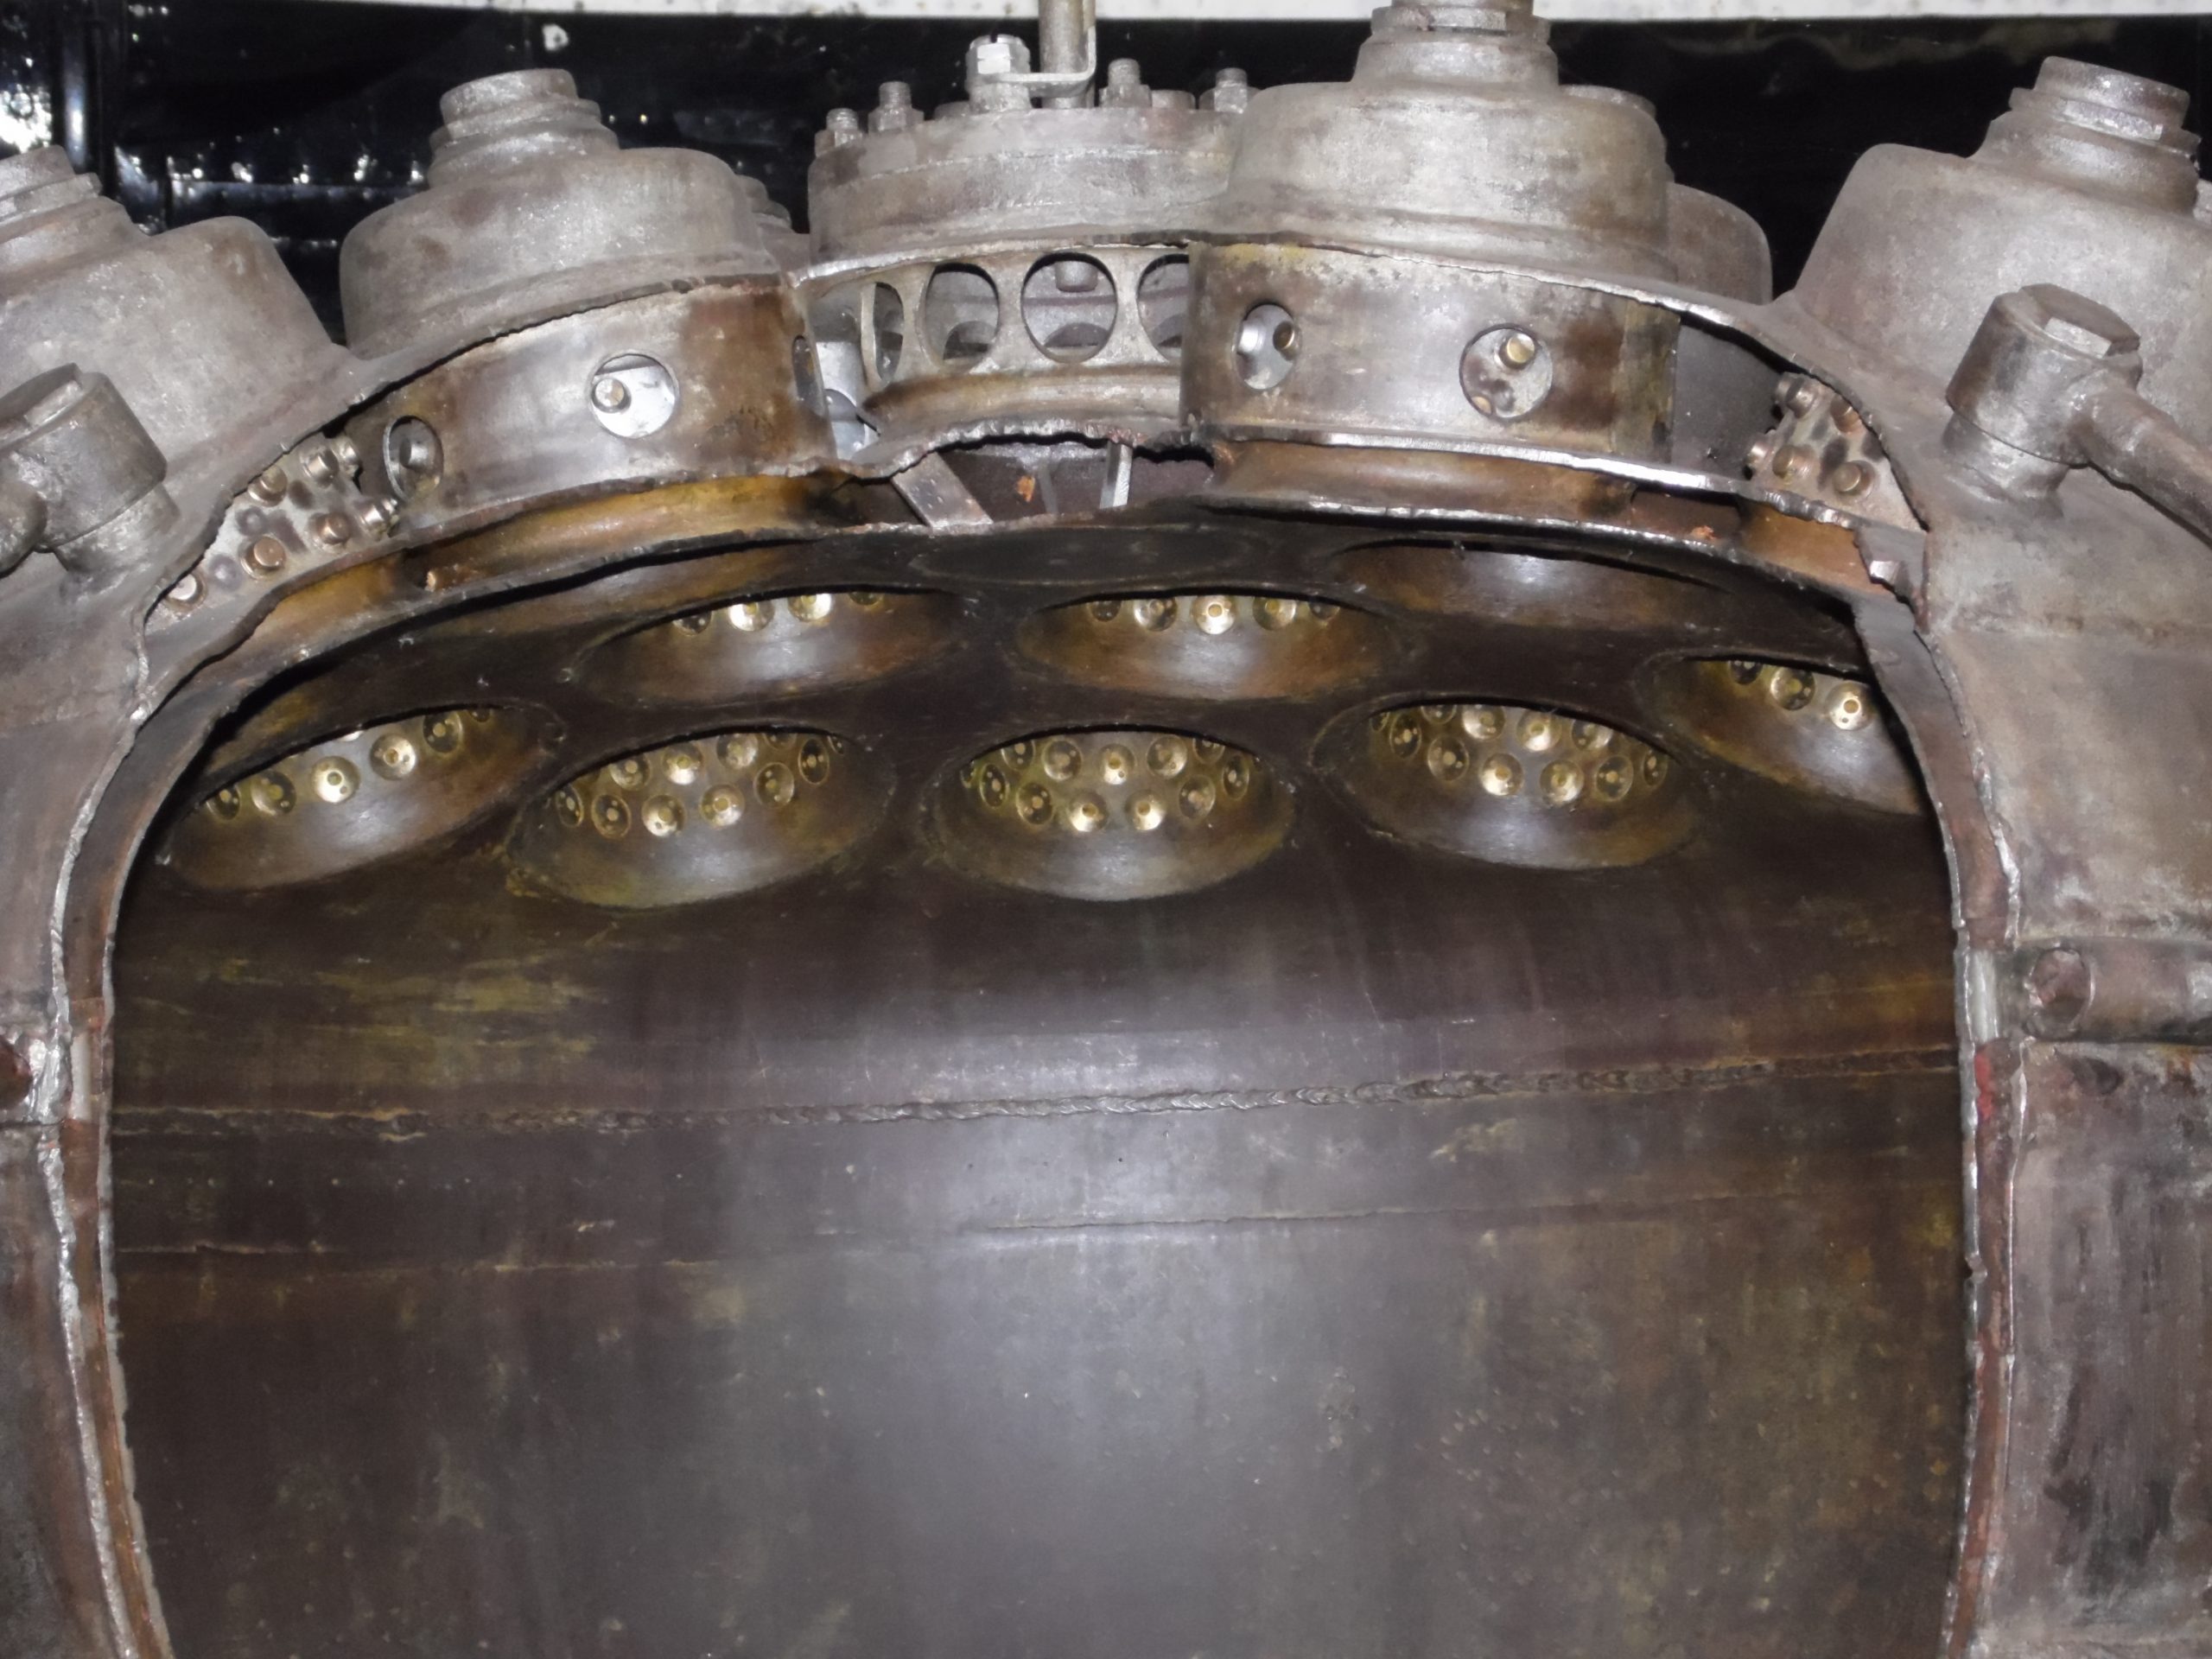 Photograph of a cross-section of a rocket engine.